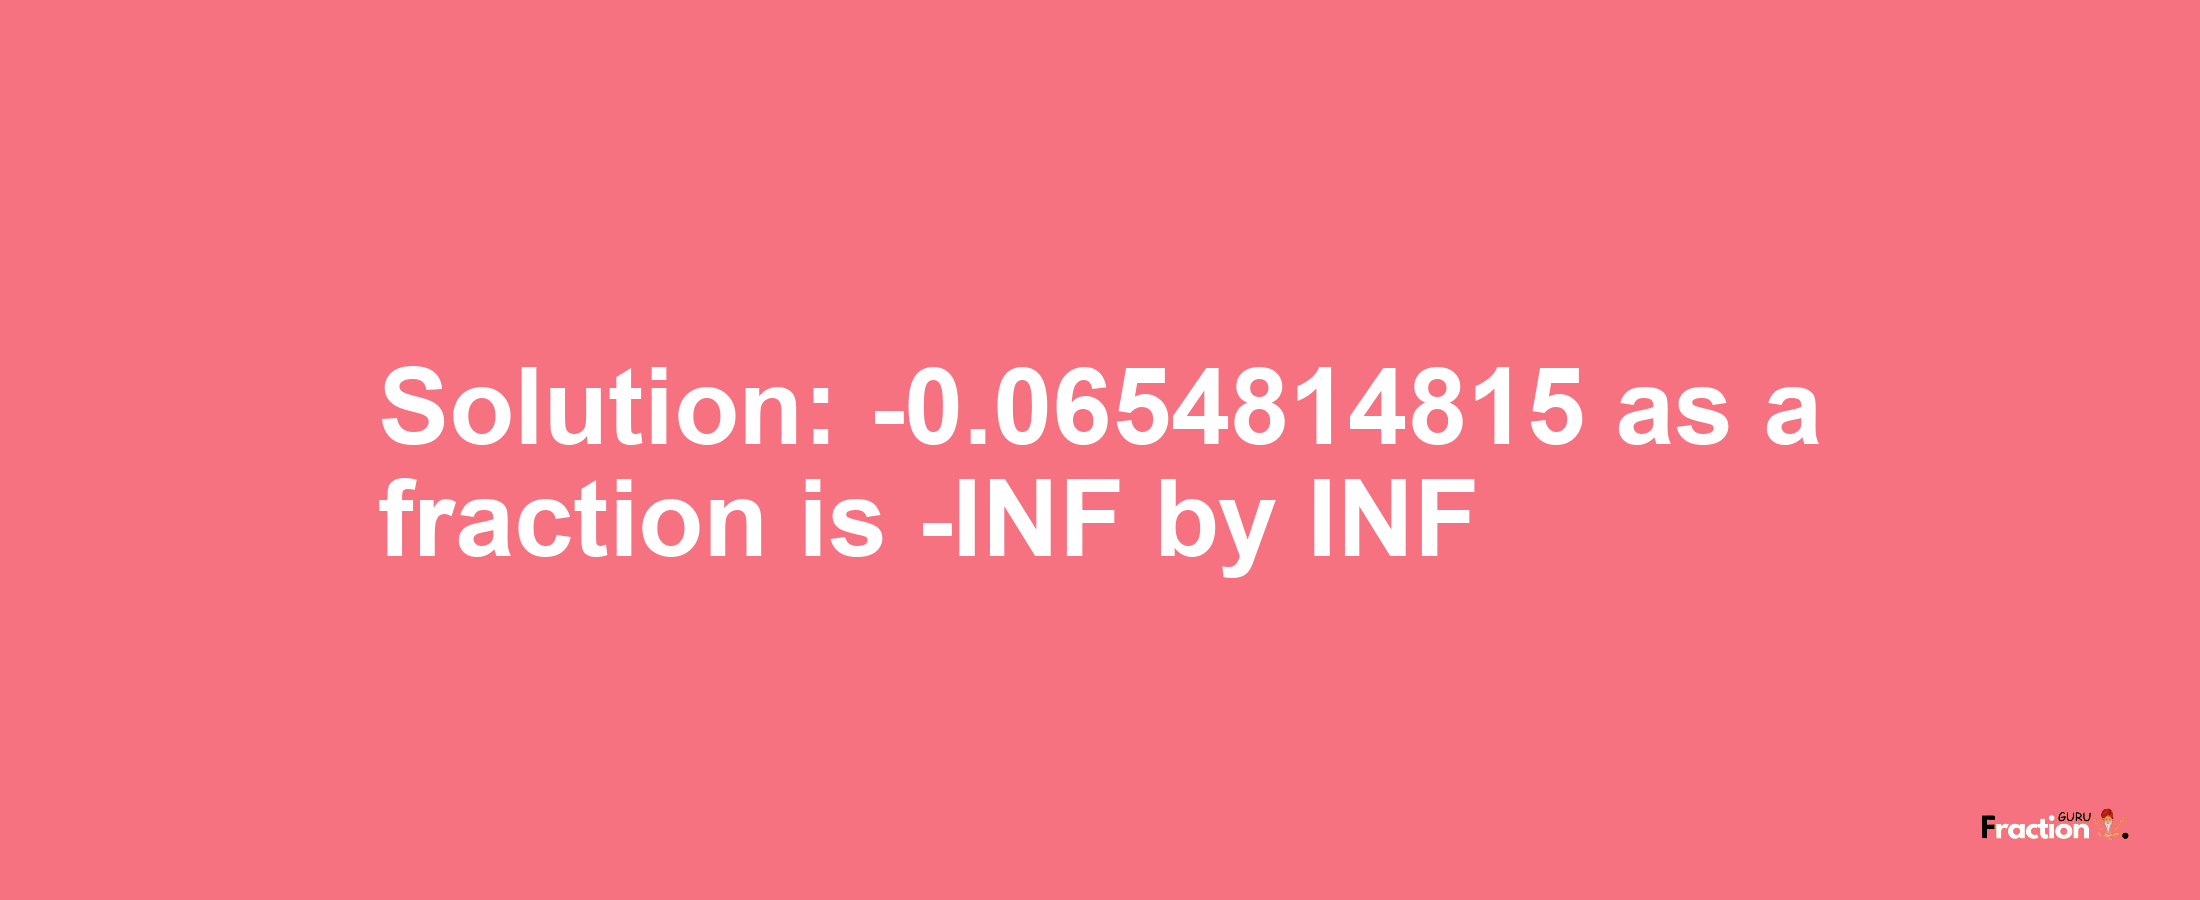 Solution:-0.0654814815 as a fraction is -INF/INF